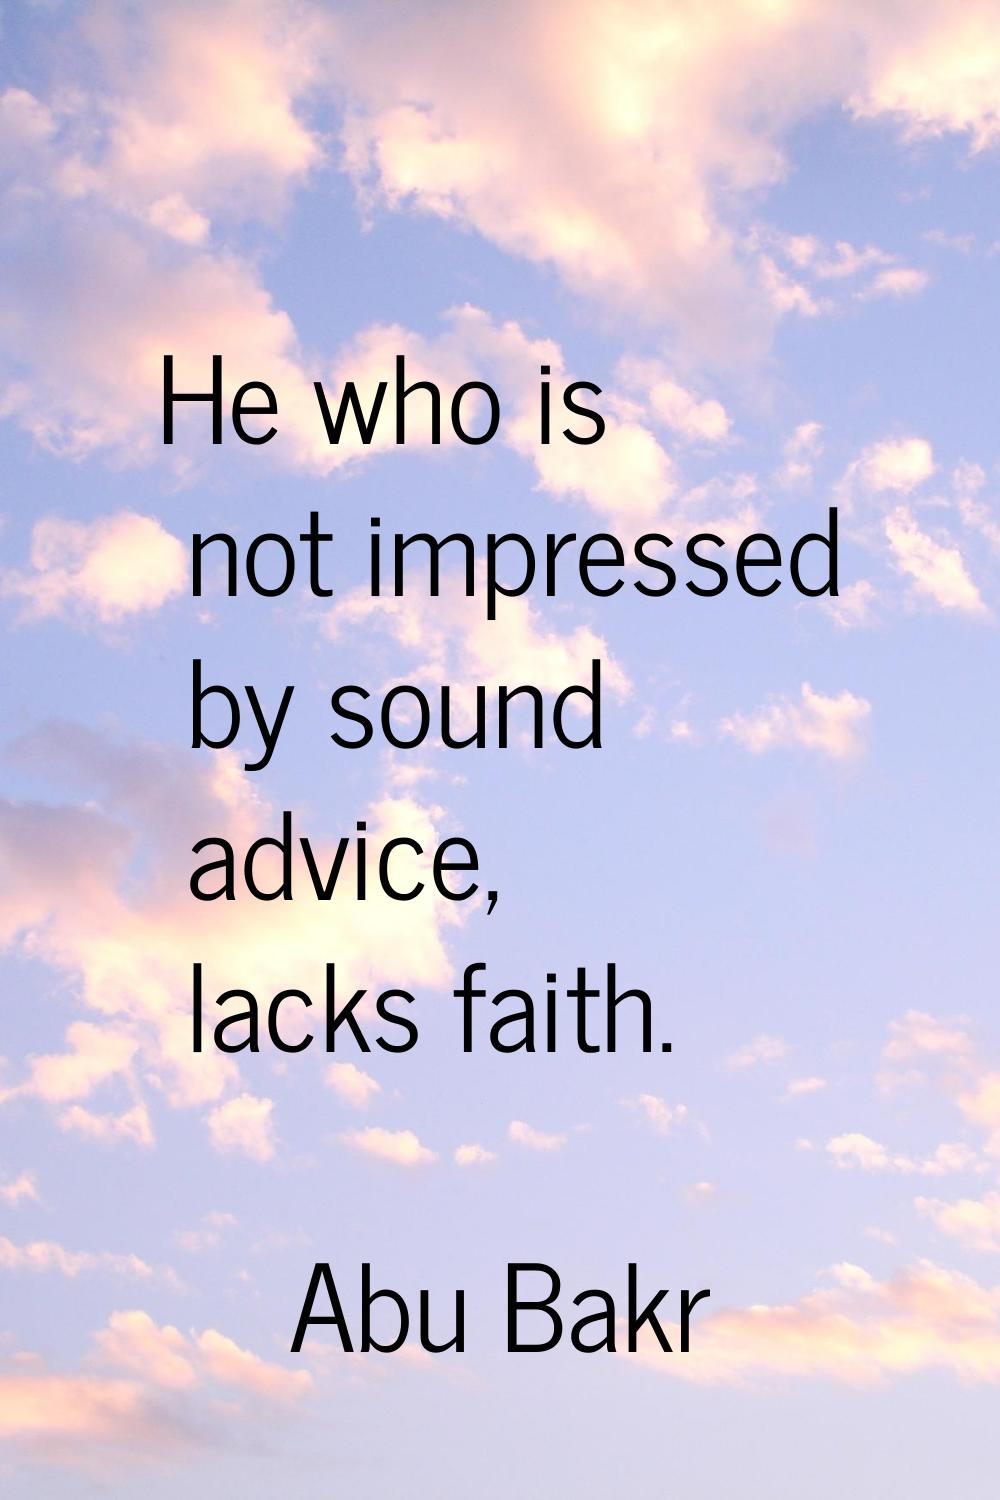 He who is not impressed by sound advice, lacks faith.